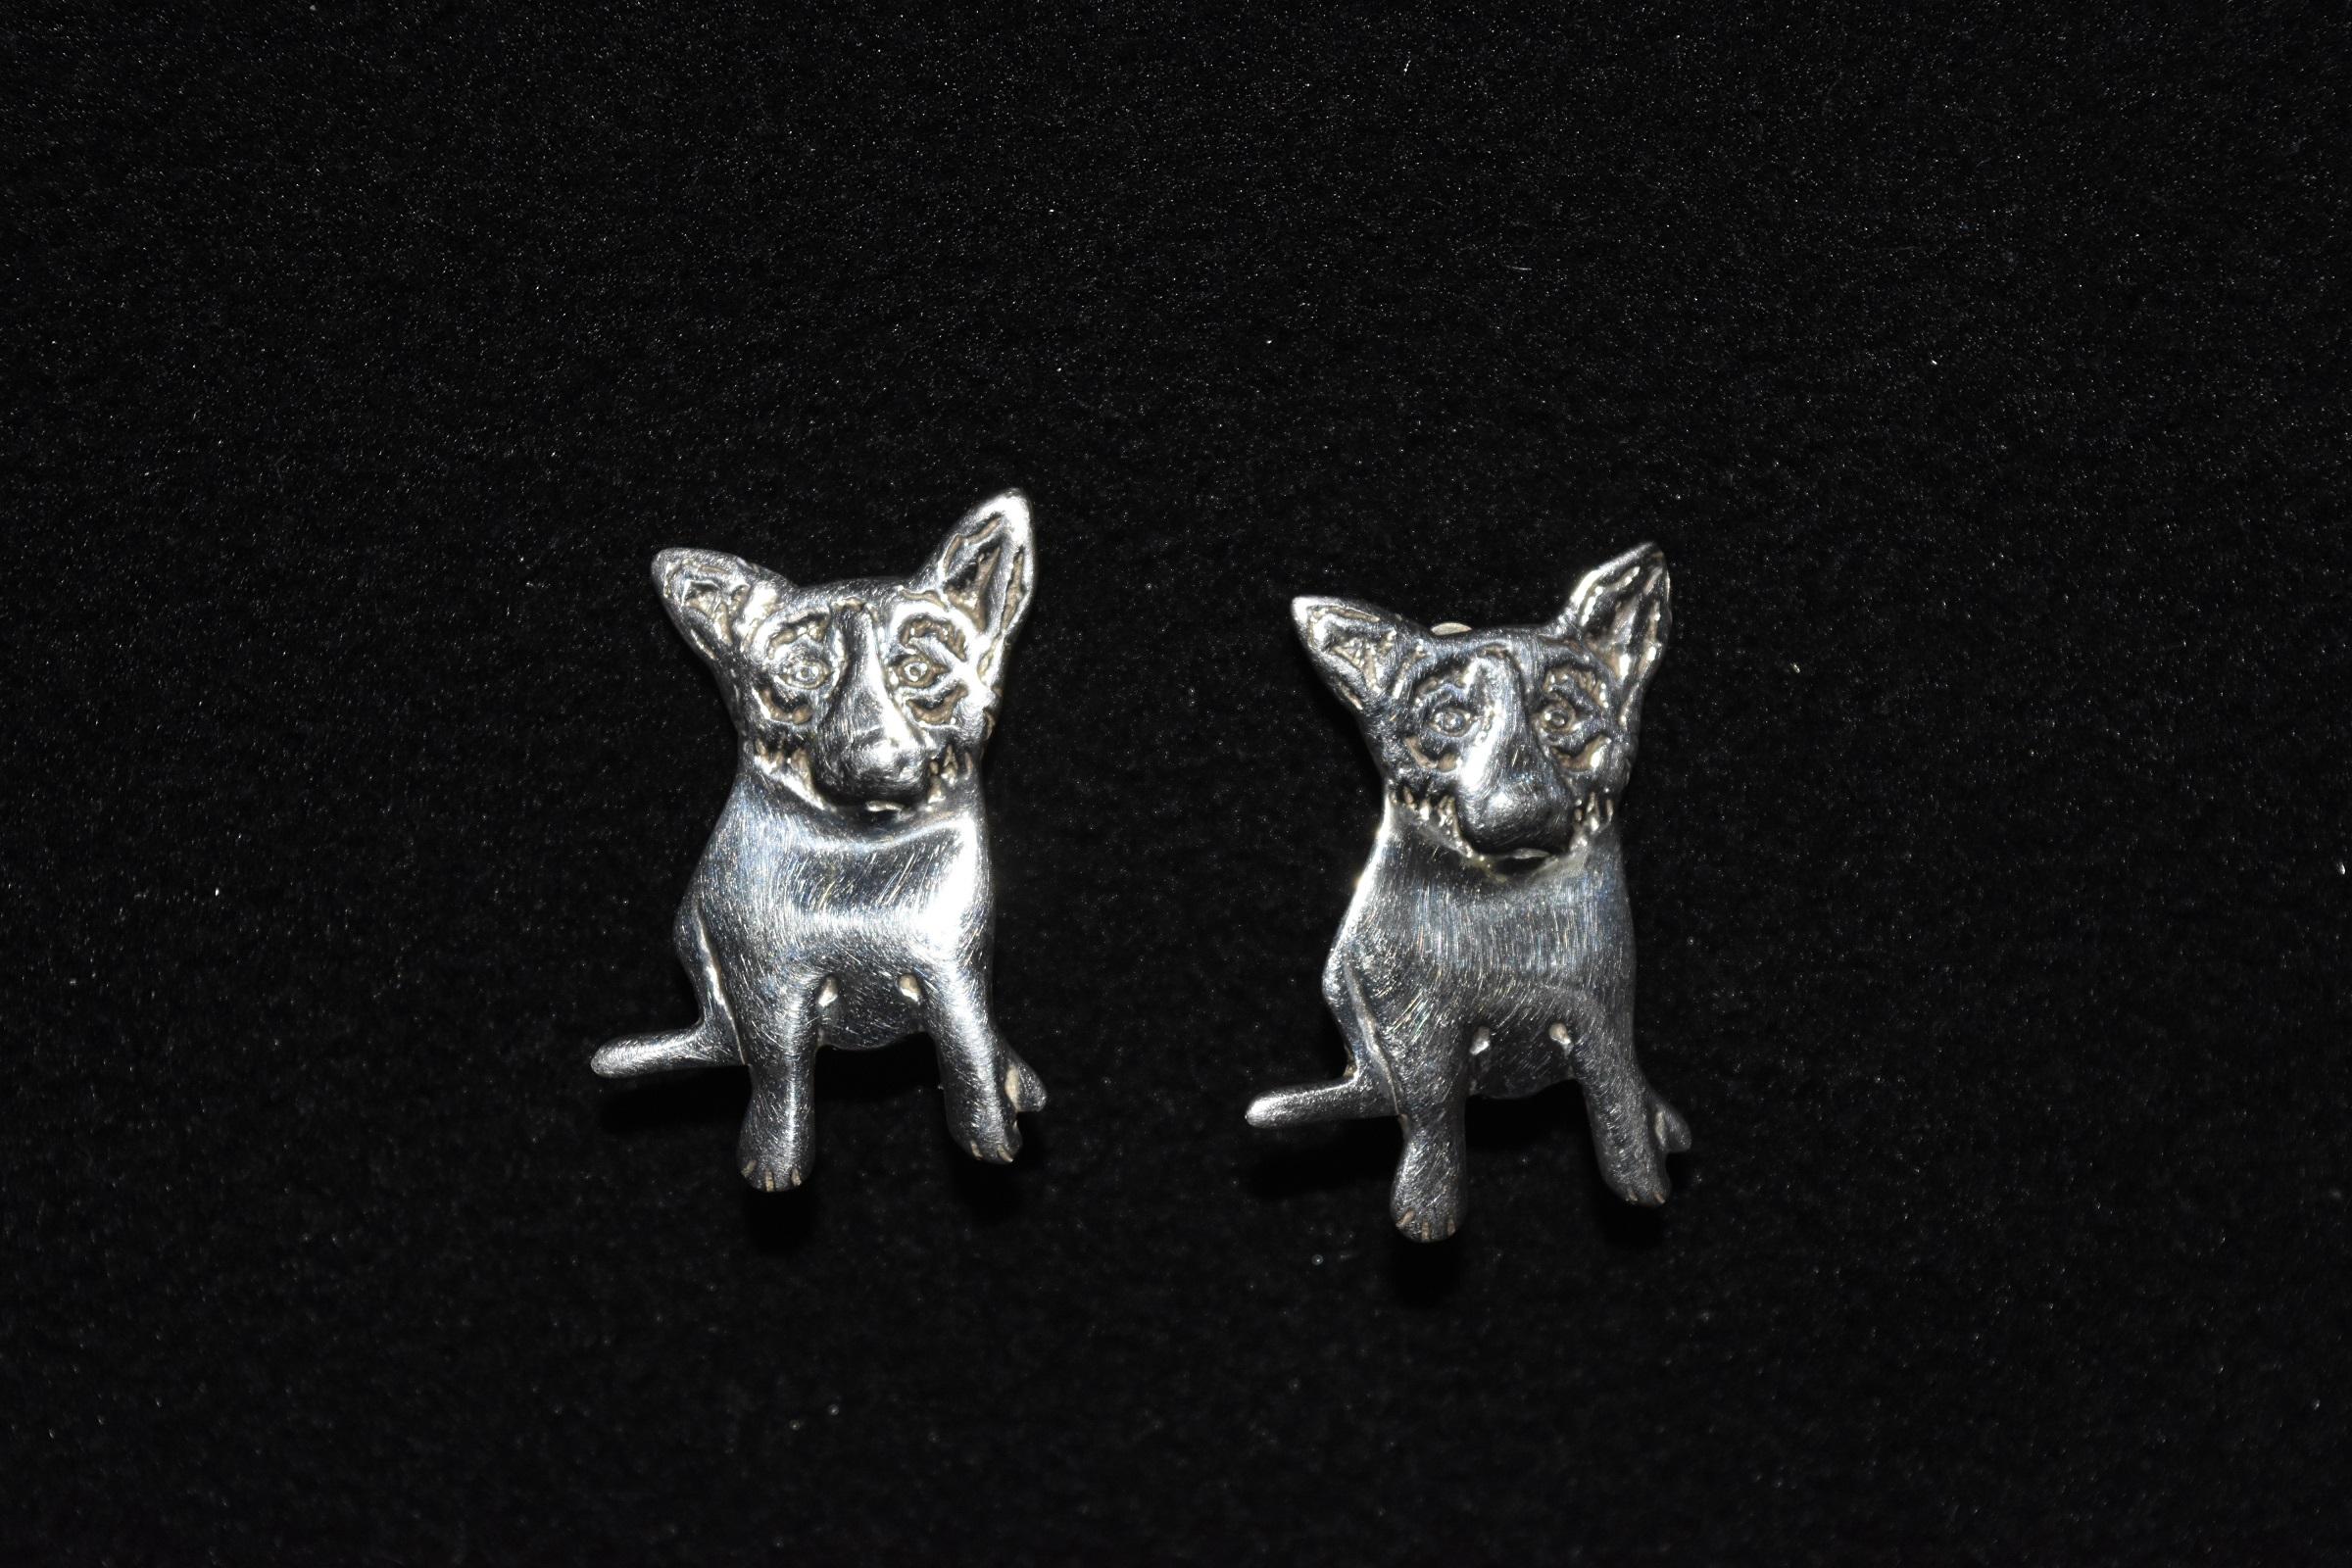 Blue Dog Sterling Silver Clip-on Earrings with @Rodrigue and "Sterling" on back - Art by George Rodrigue